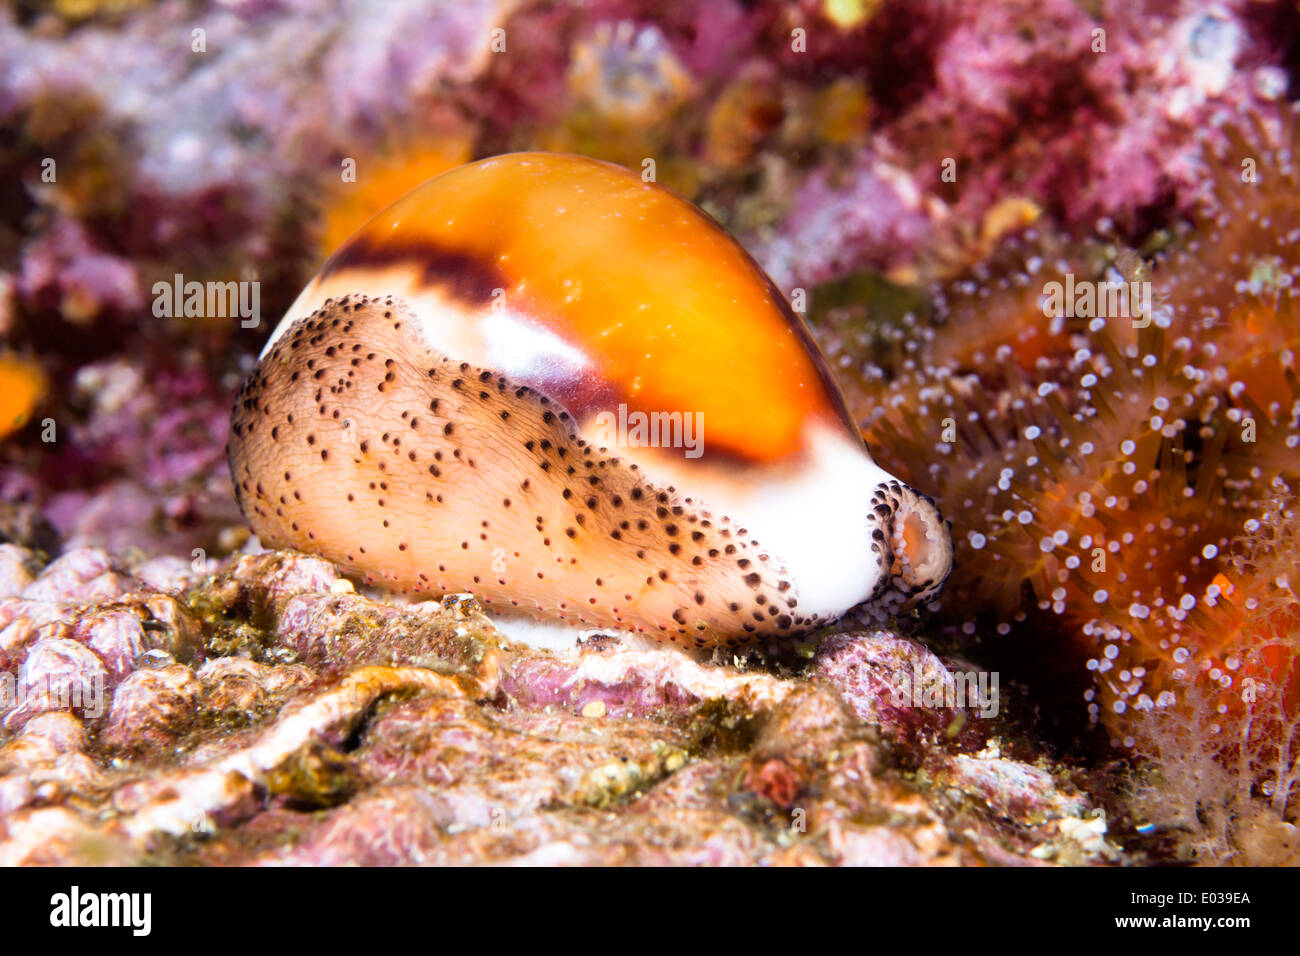 A beautiful cowry snail, a mollusk, crawls across a colorful reef with its mantle wrapped over its shiny shell. Stock Photo